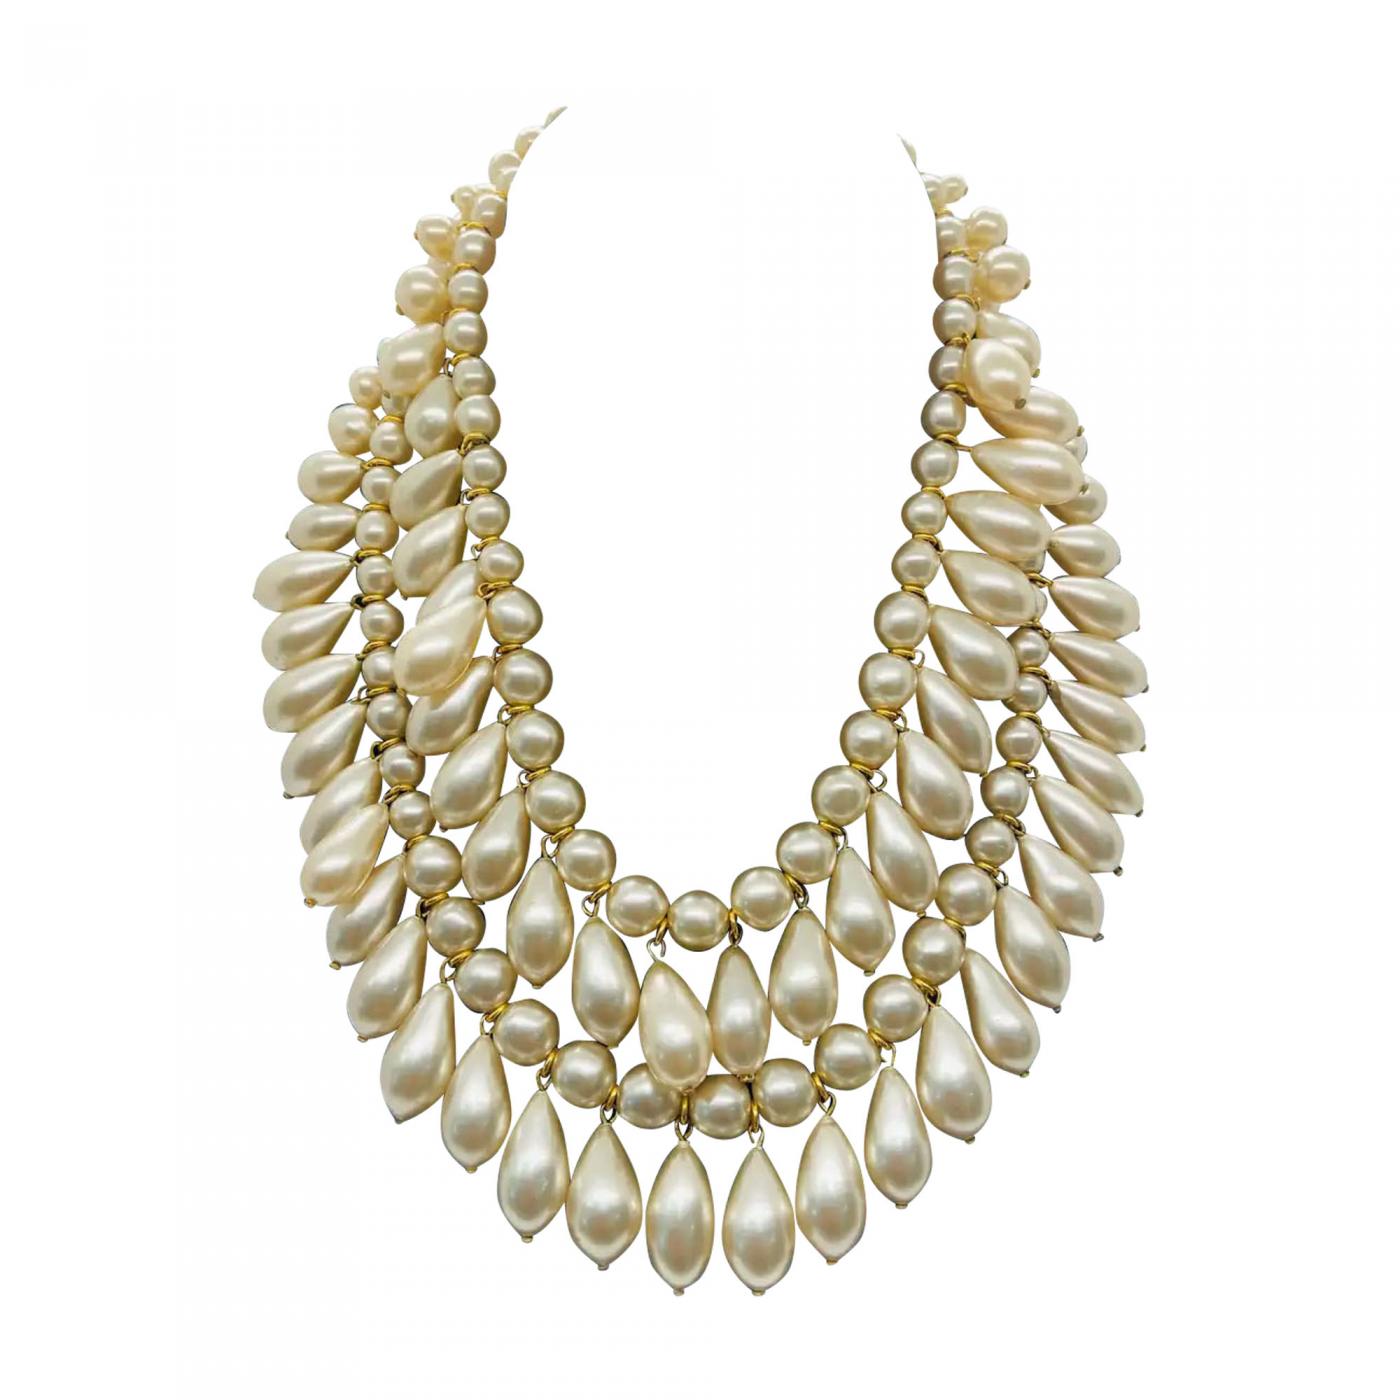 Chanel - Vintage Chanel Faux Pearl Multi-Strand Necklace